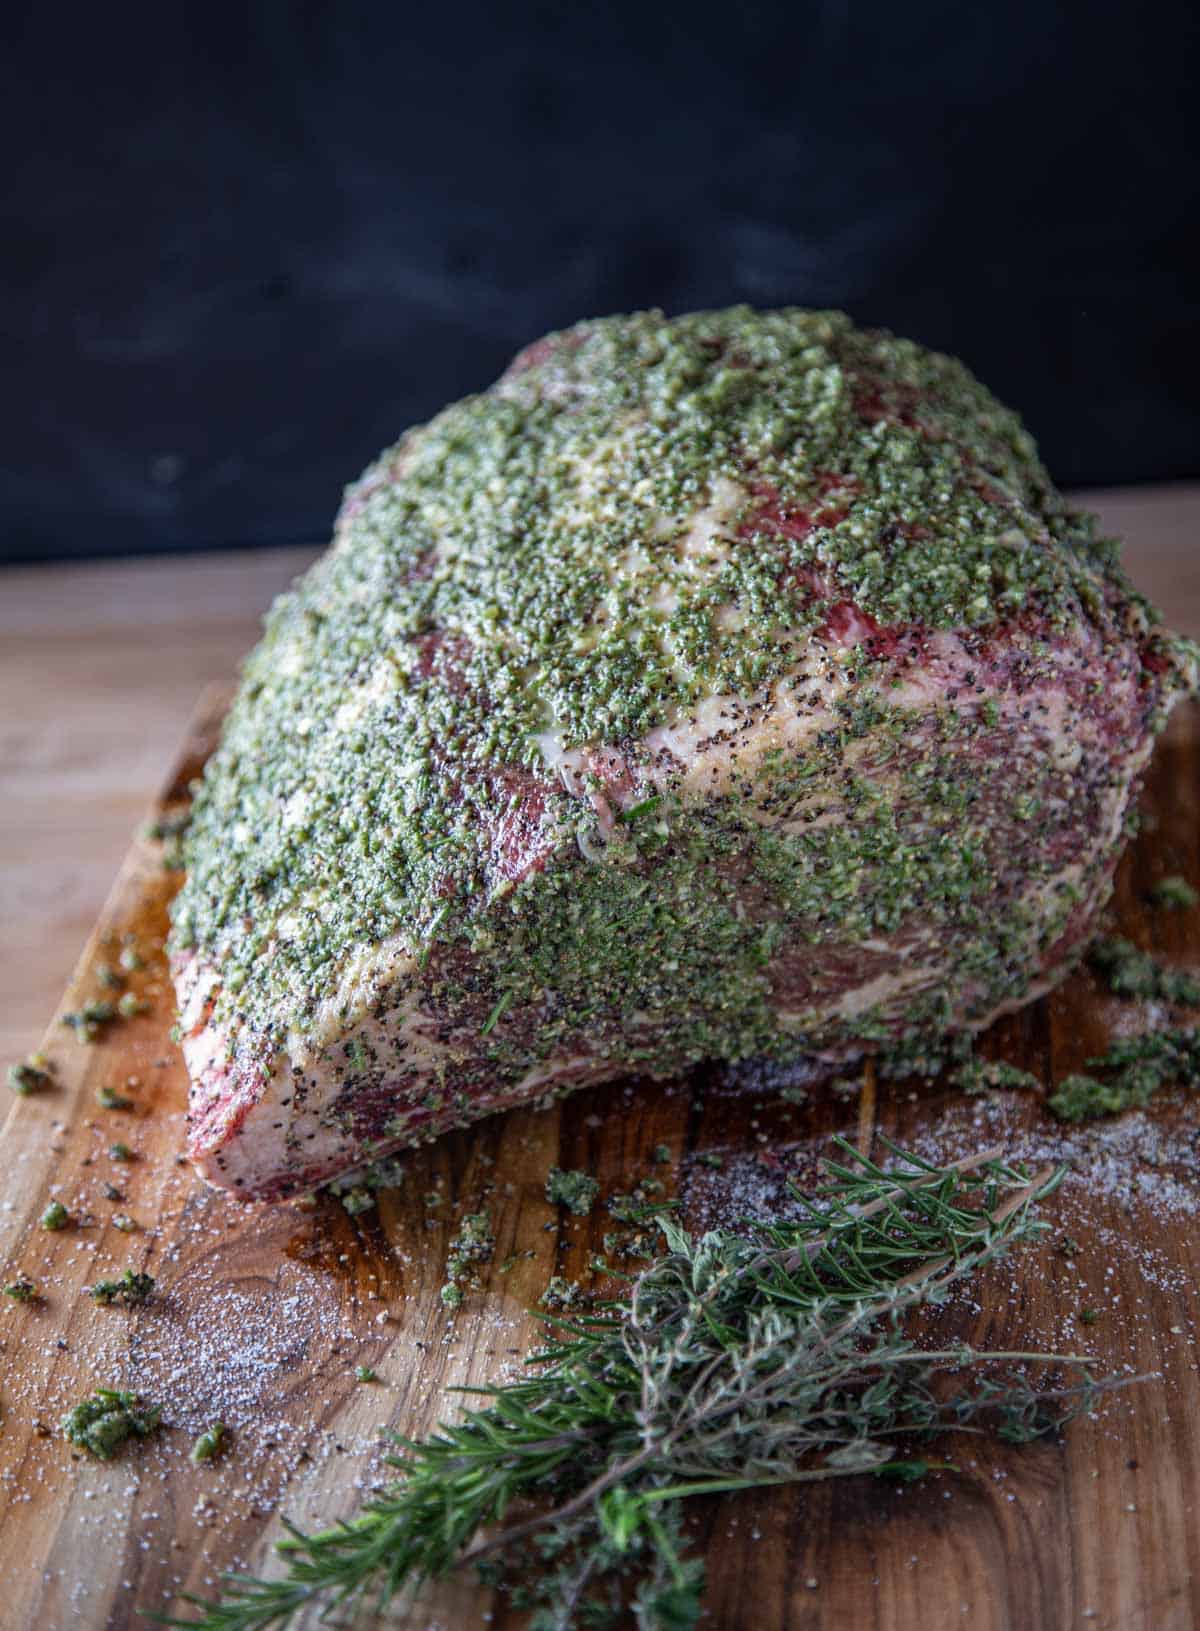 Prime Rib Roast seasoned with herb paste on a cutting board.